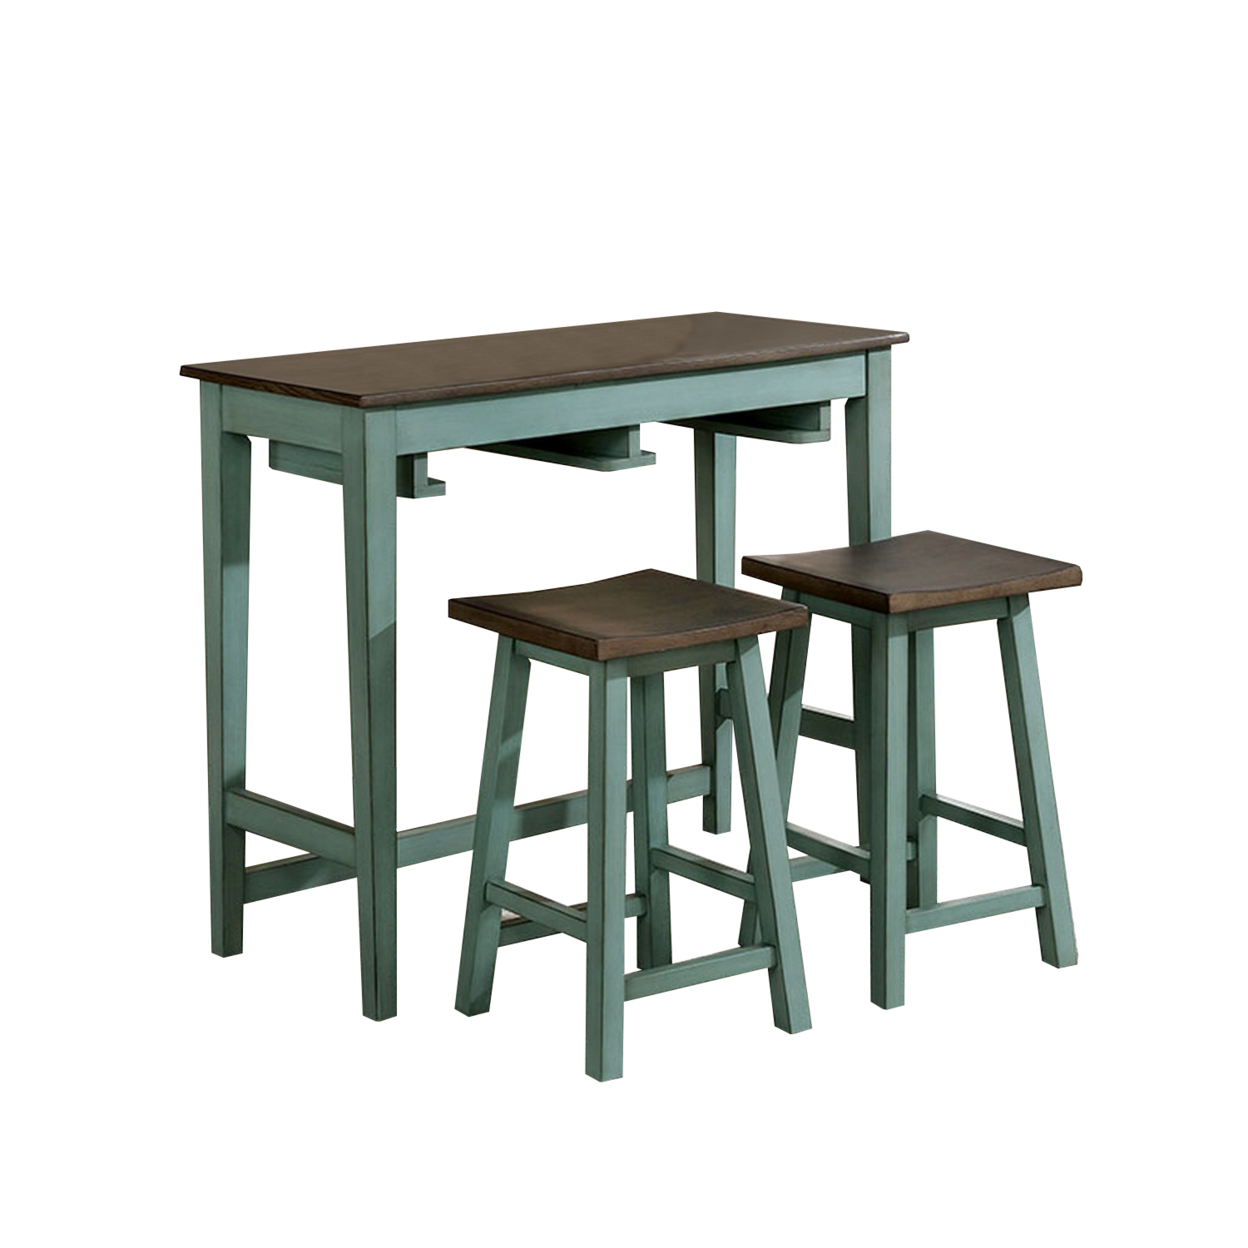 3 Piece Bar Table Set With Contoured Seat, Antique Blue And Brown- Saltoro Sherpi